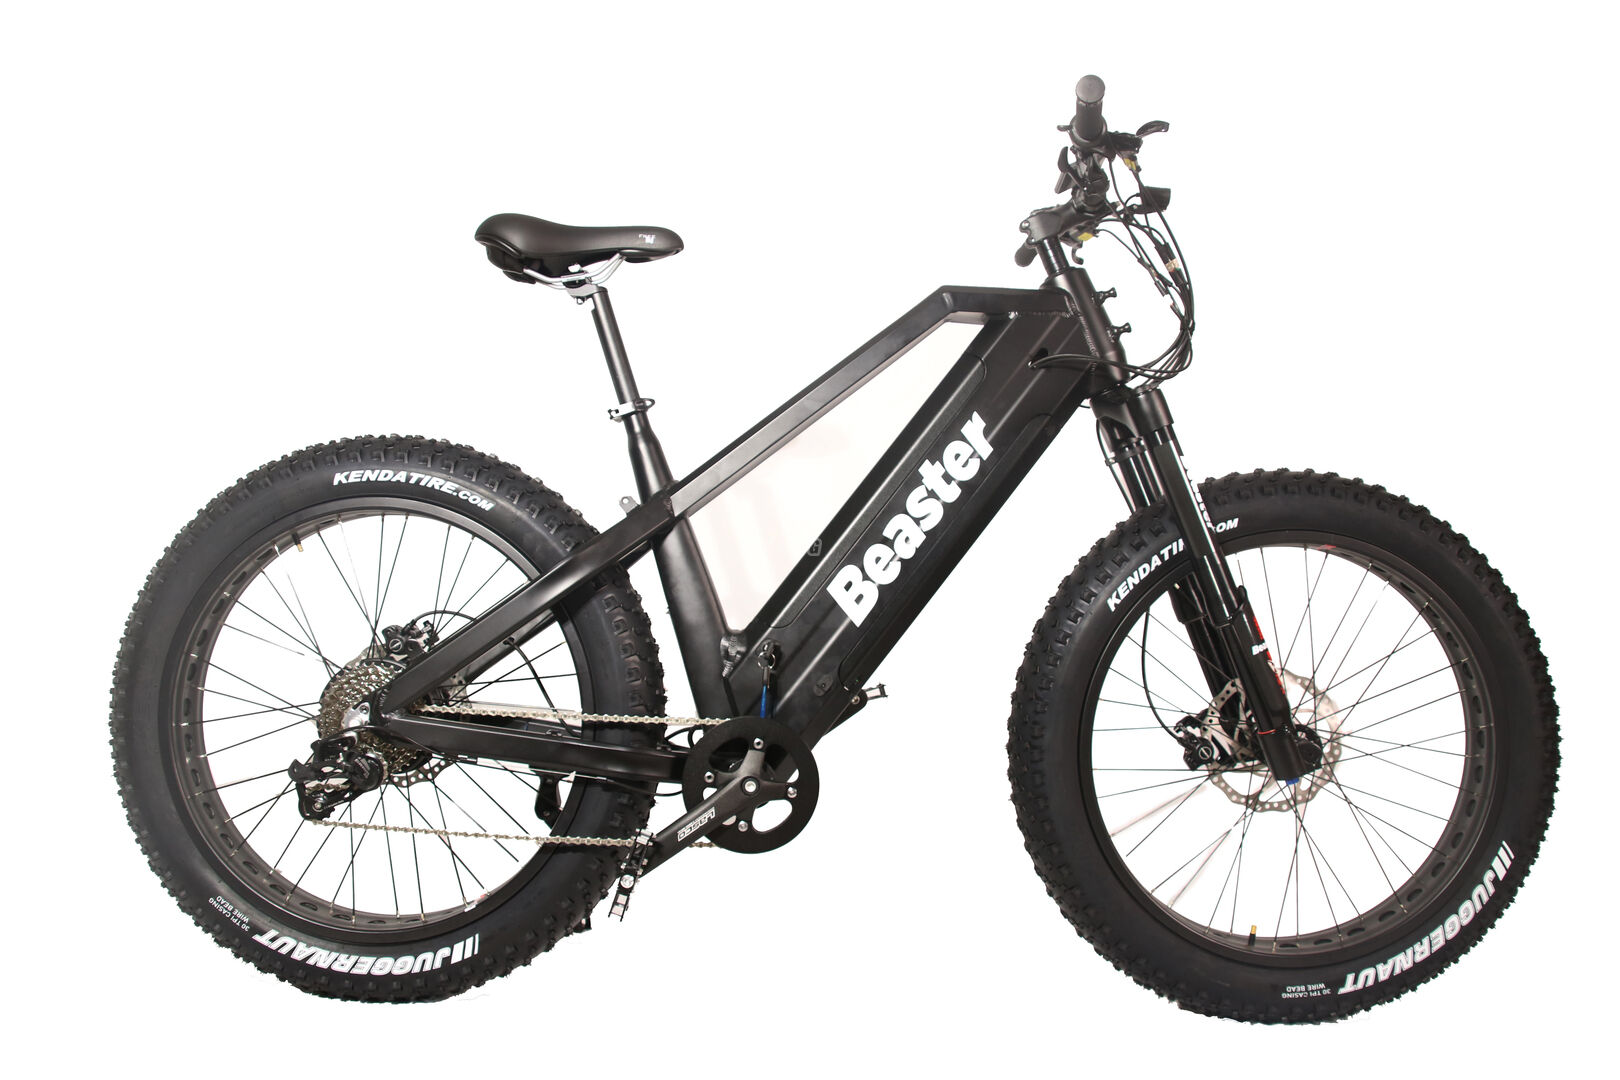 Beaster Electric bicycle